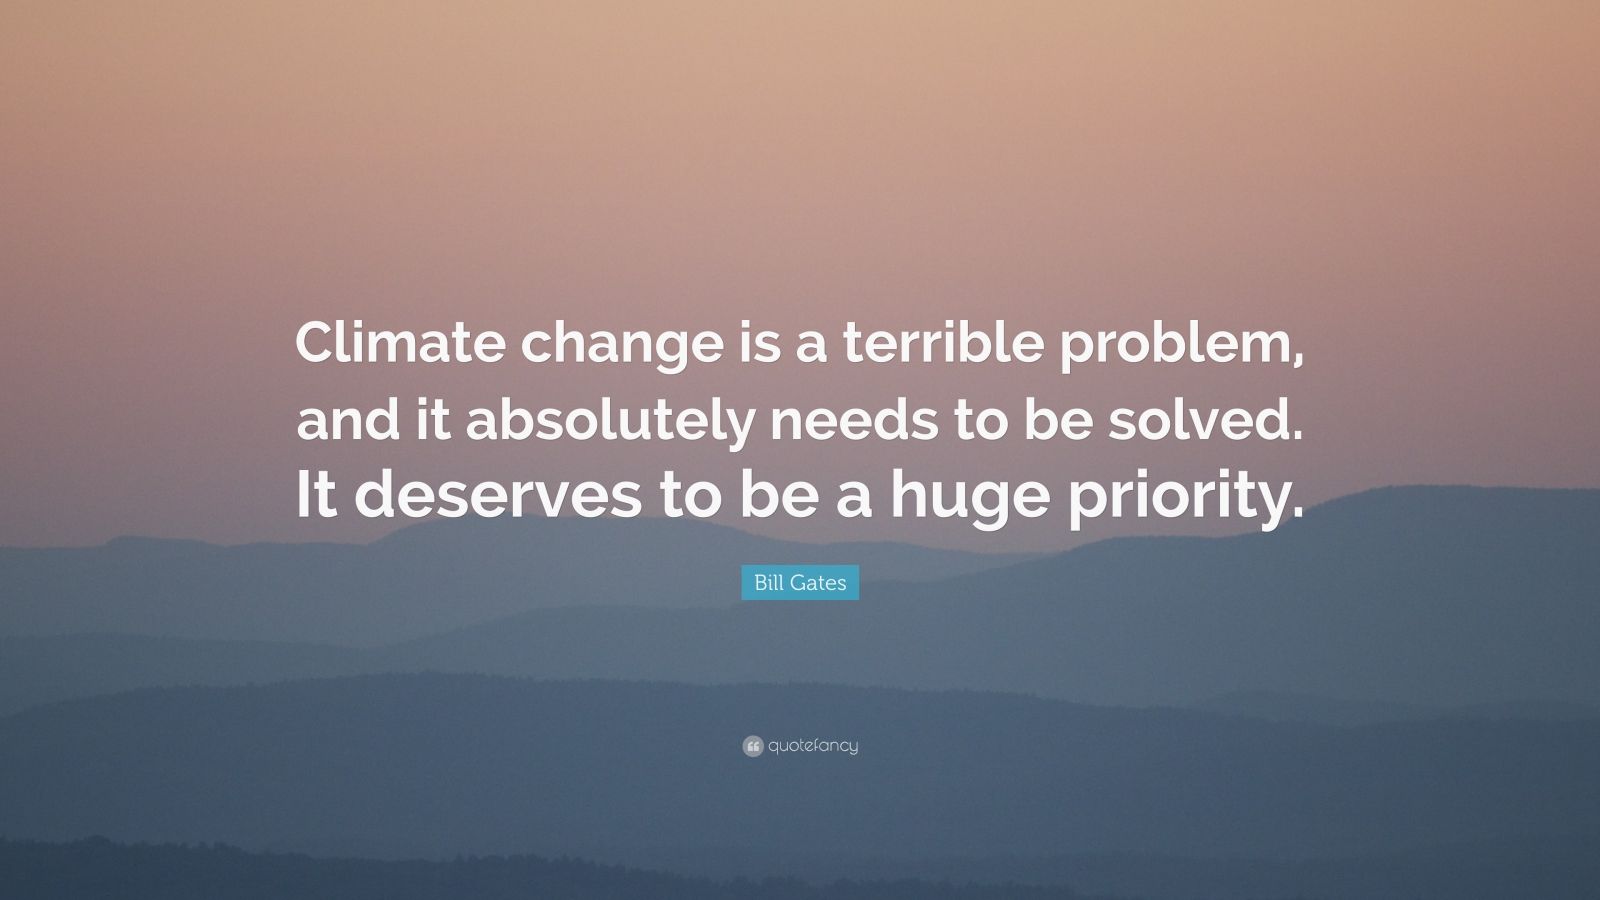 Bill Gates Quote: "Climate change is a terrible problem ...